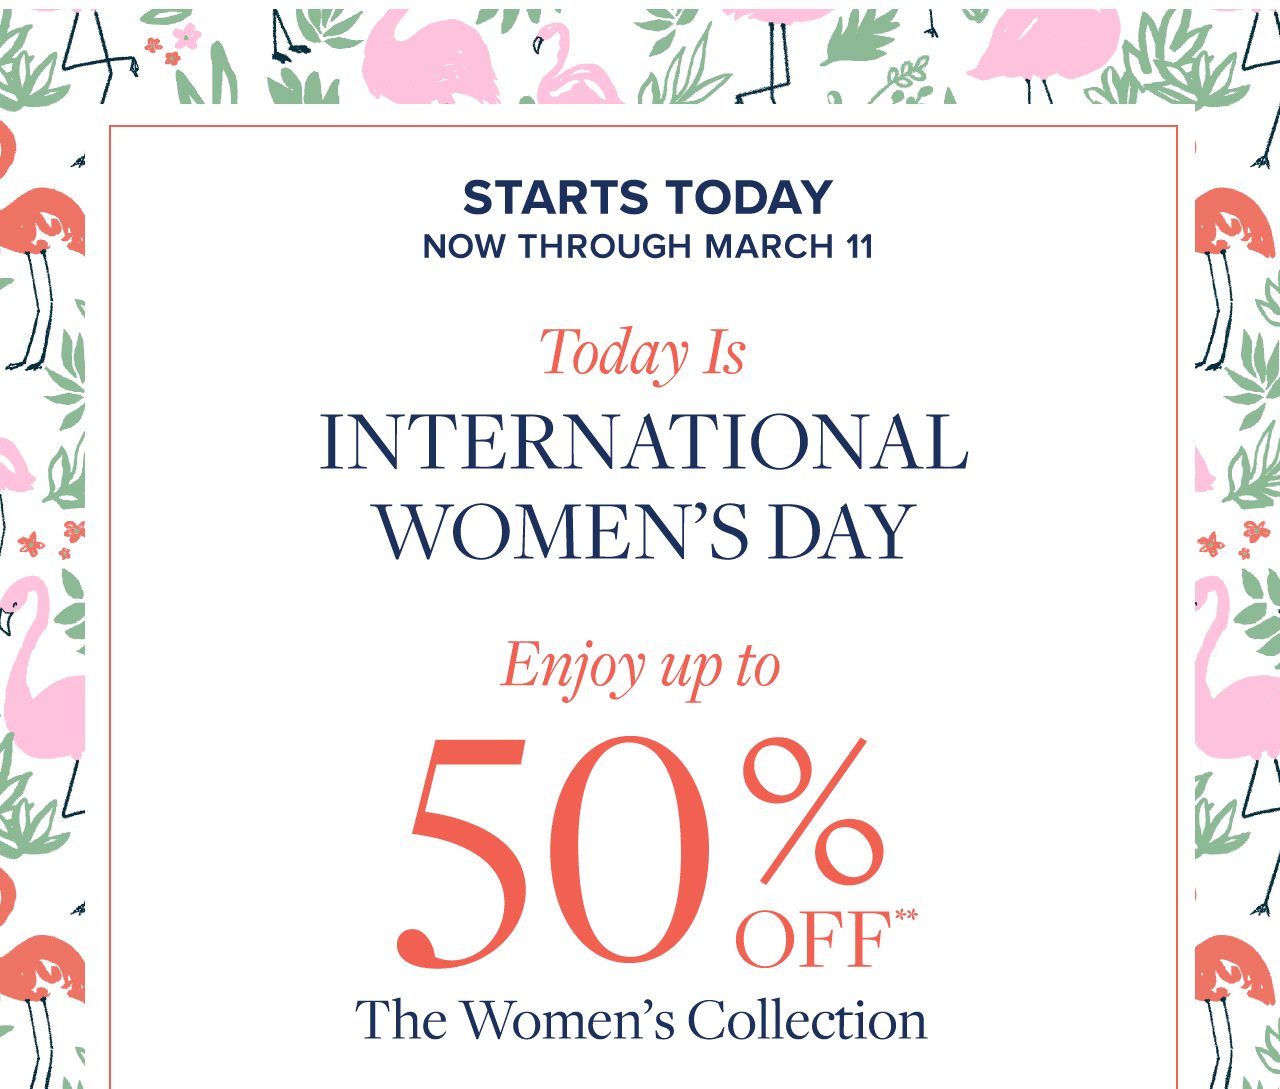 Starts Today Now Through March 11 Today Is International Women's Day Enjoy up tp 50% Off The Women's Collection